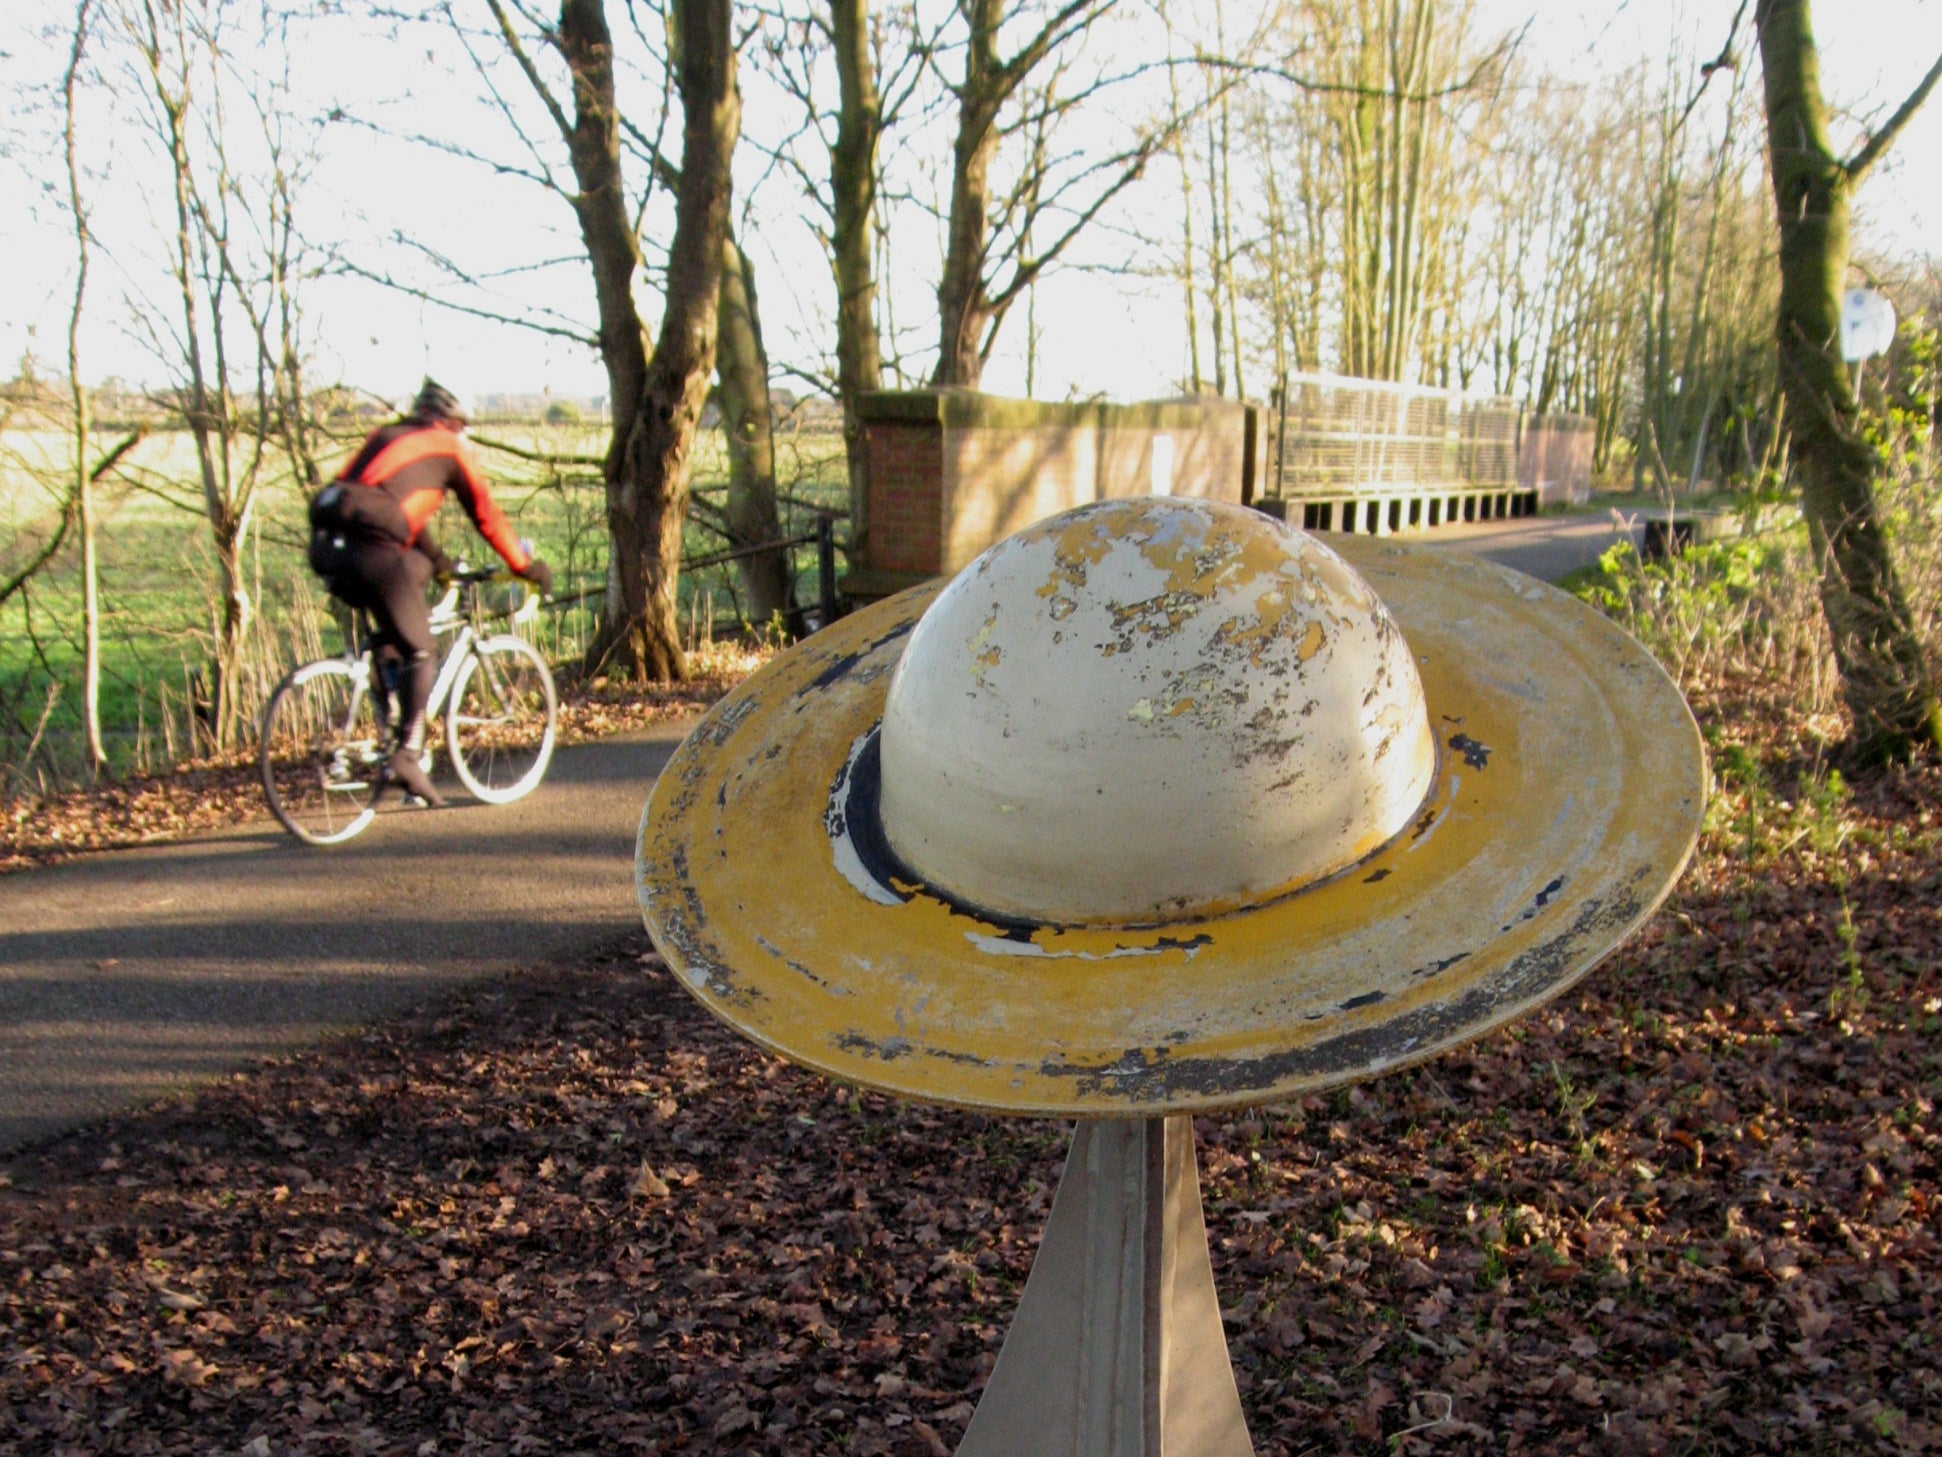 The York Solar System cycle way